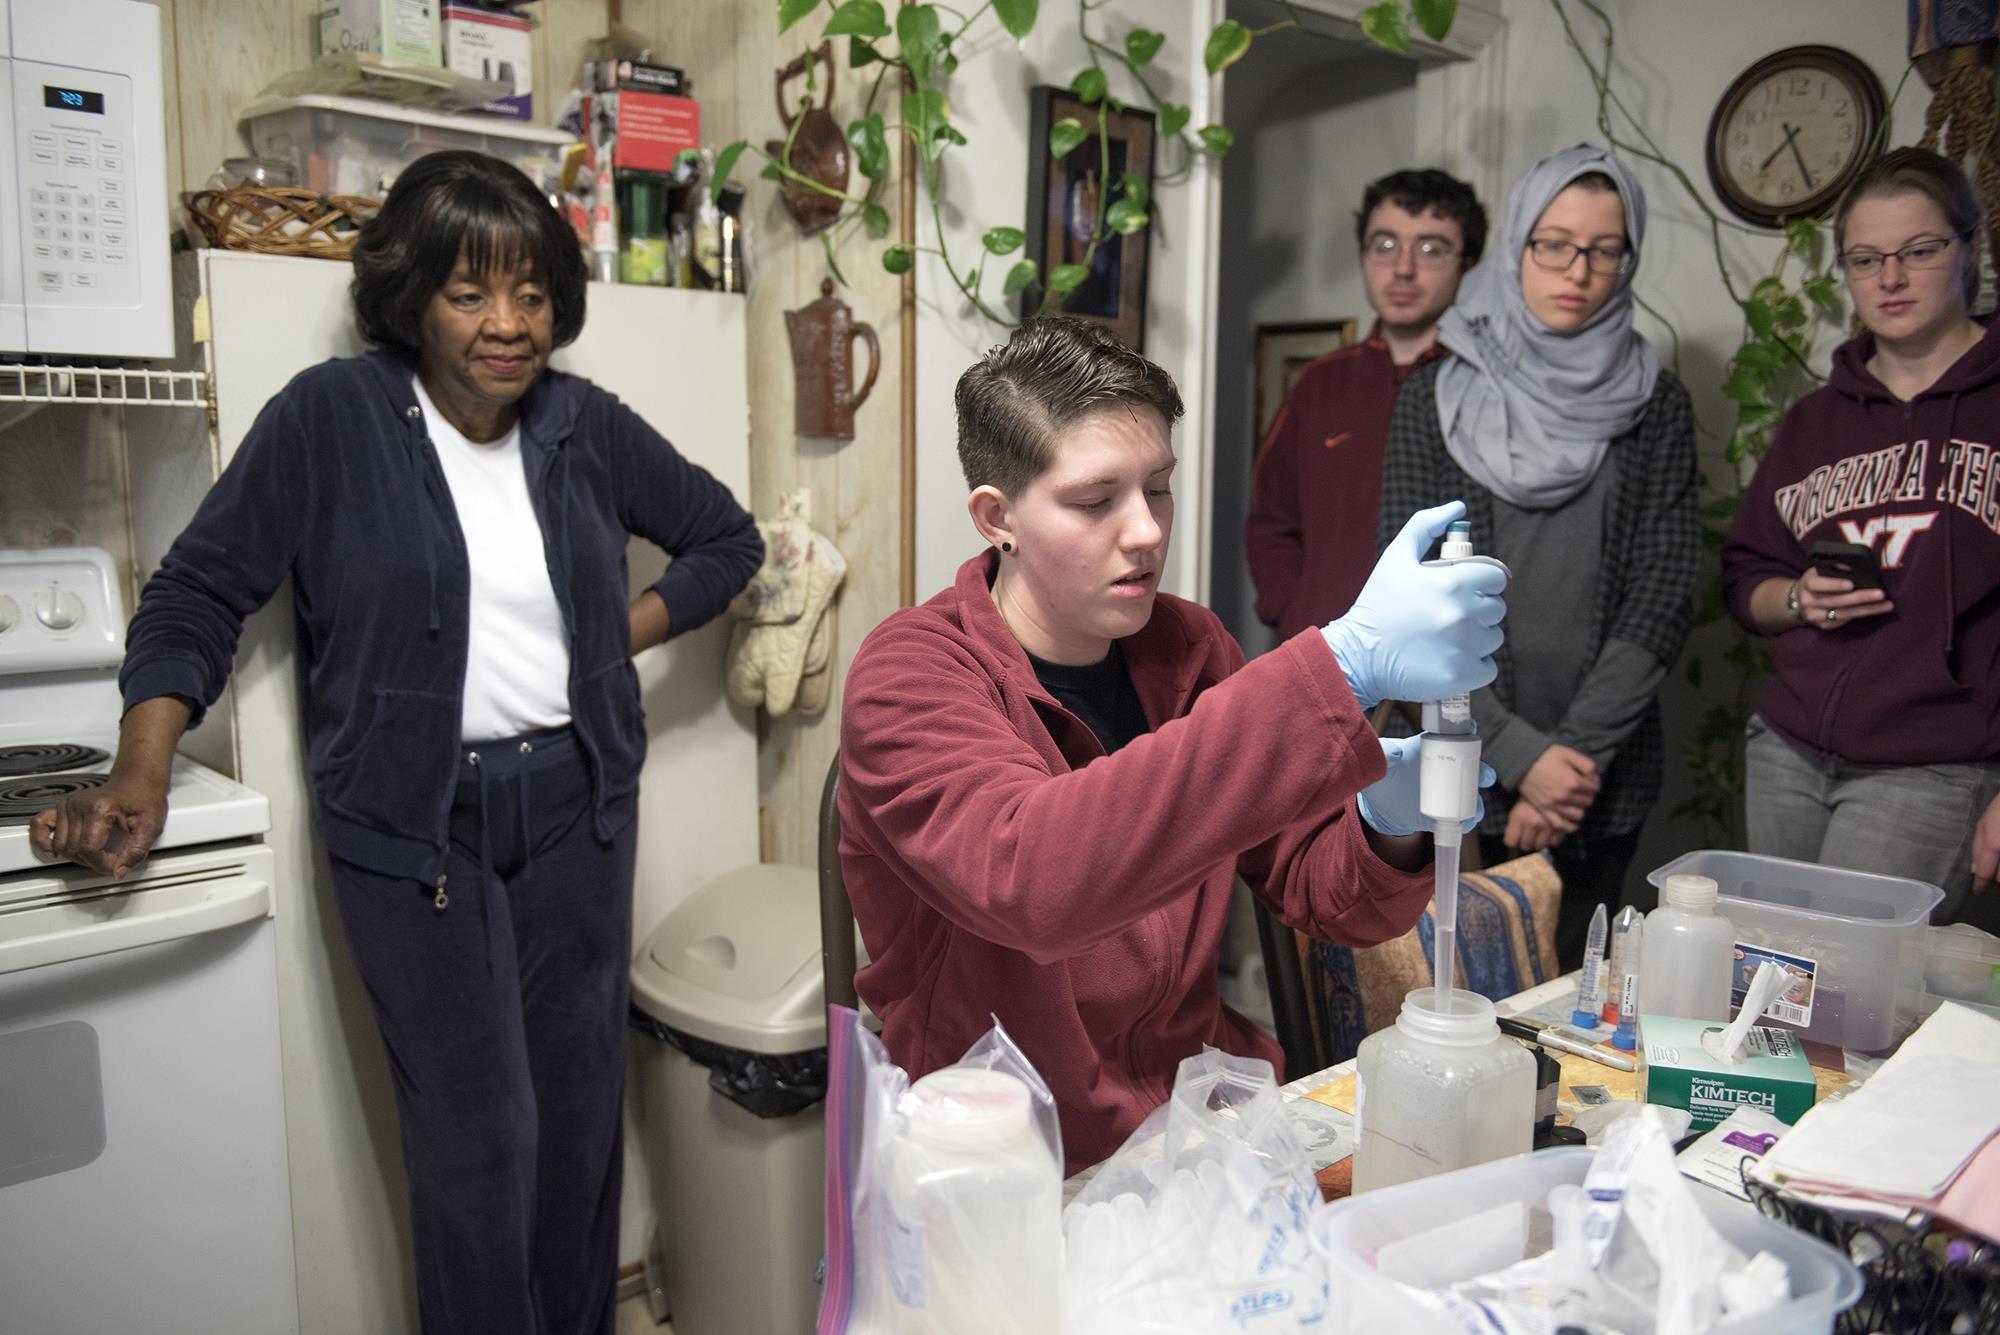 How Flint tapped in to community action | Opinion - Chemistry World